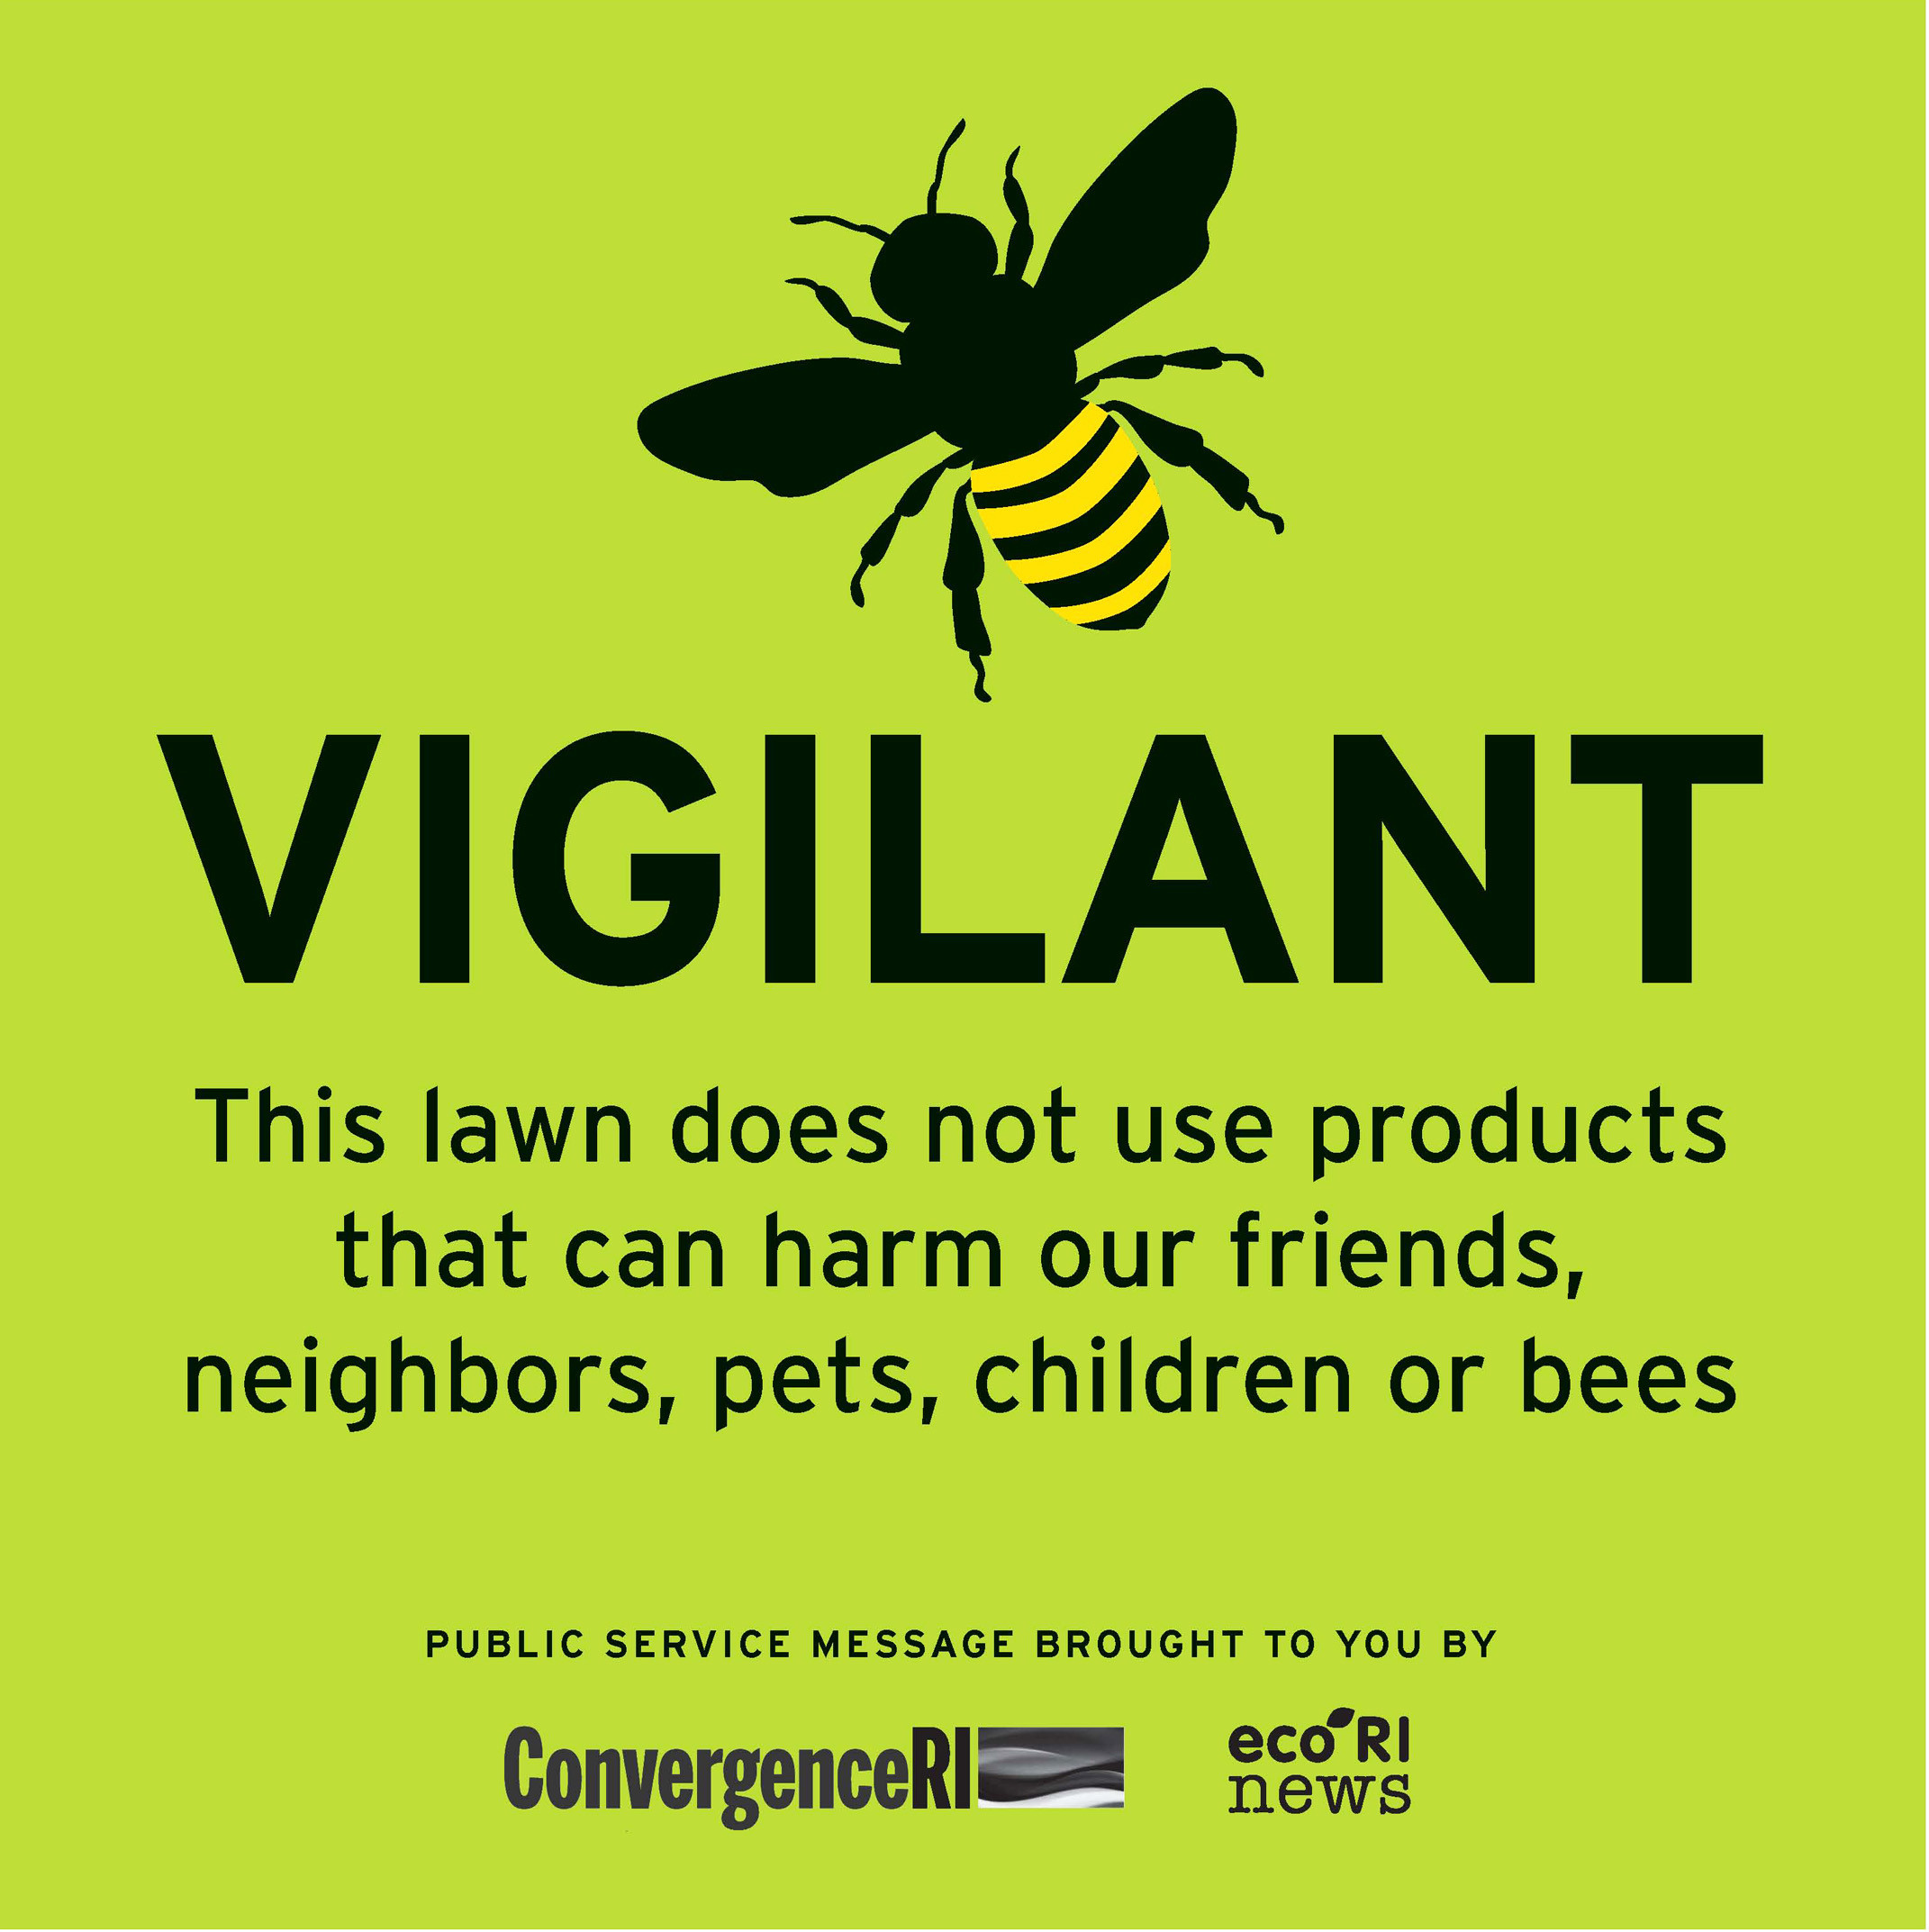 In a collaborative effort, ecoRI News and ConvergenceRI have created a "Bee Vigilant" lawn flag as a consumer awareness tool to promote not using toxic lawn chemicals and insecticides.